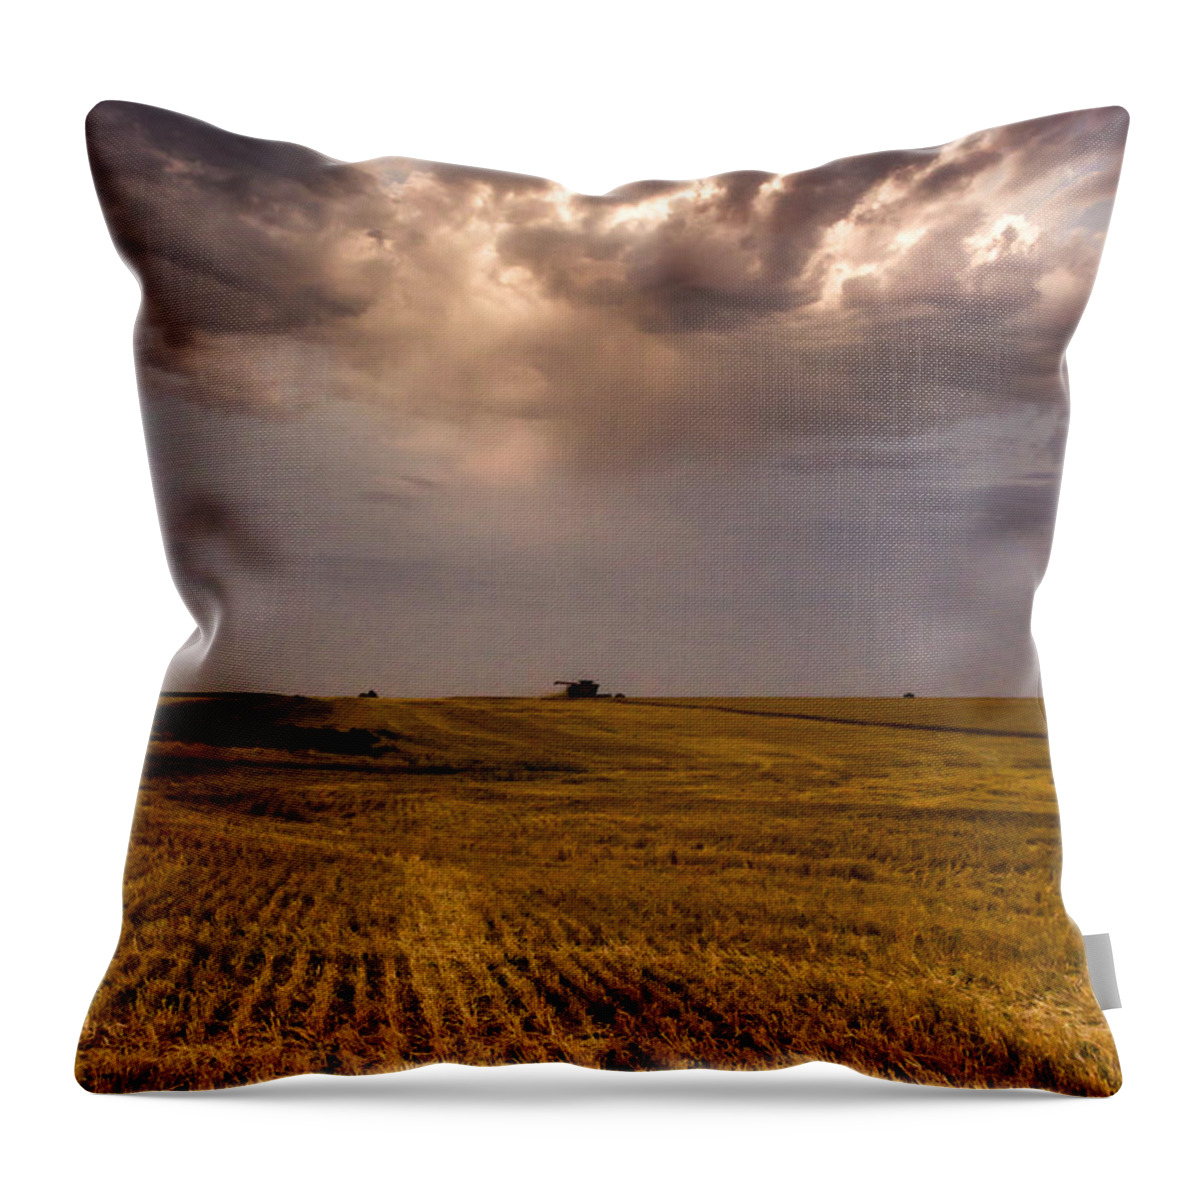 Jay Stockhaus Throw Pillow featuring the photograph Harvest by Jay Stockhaus